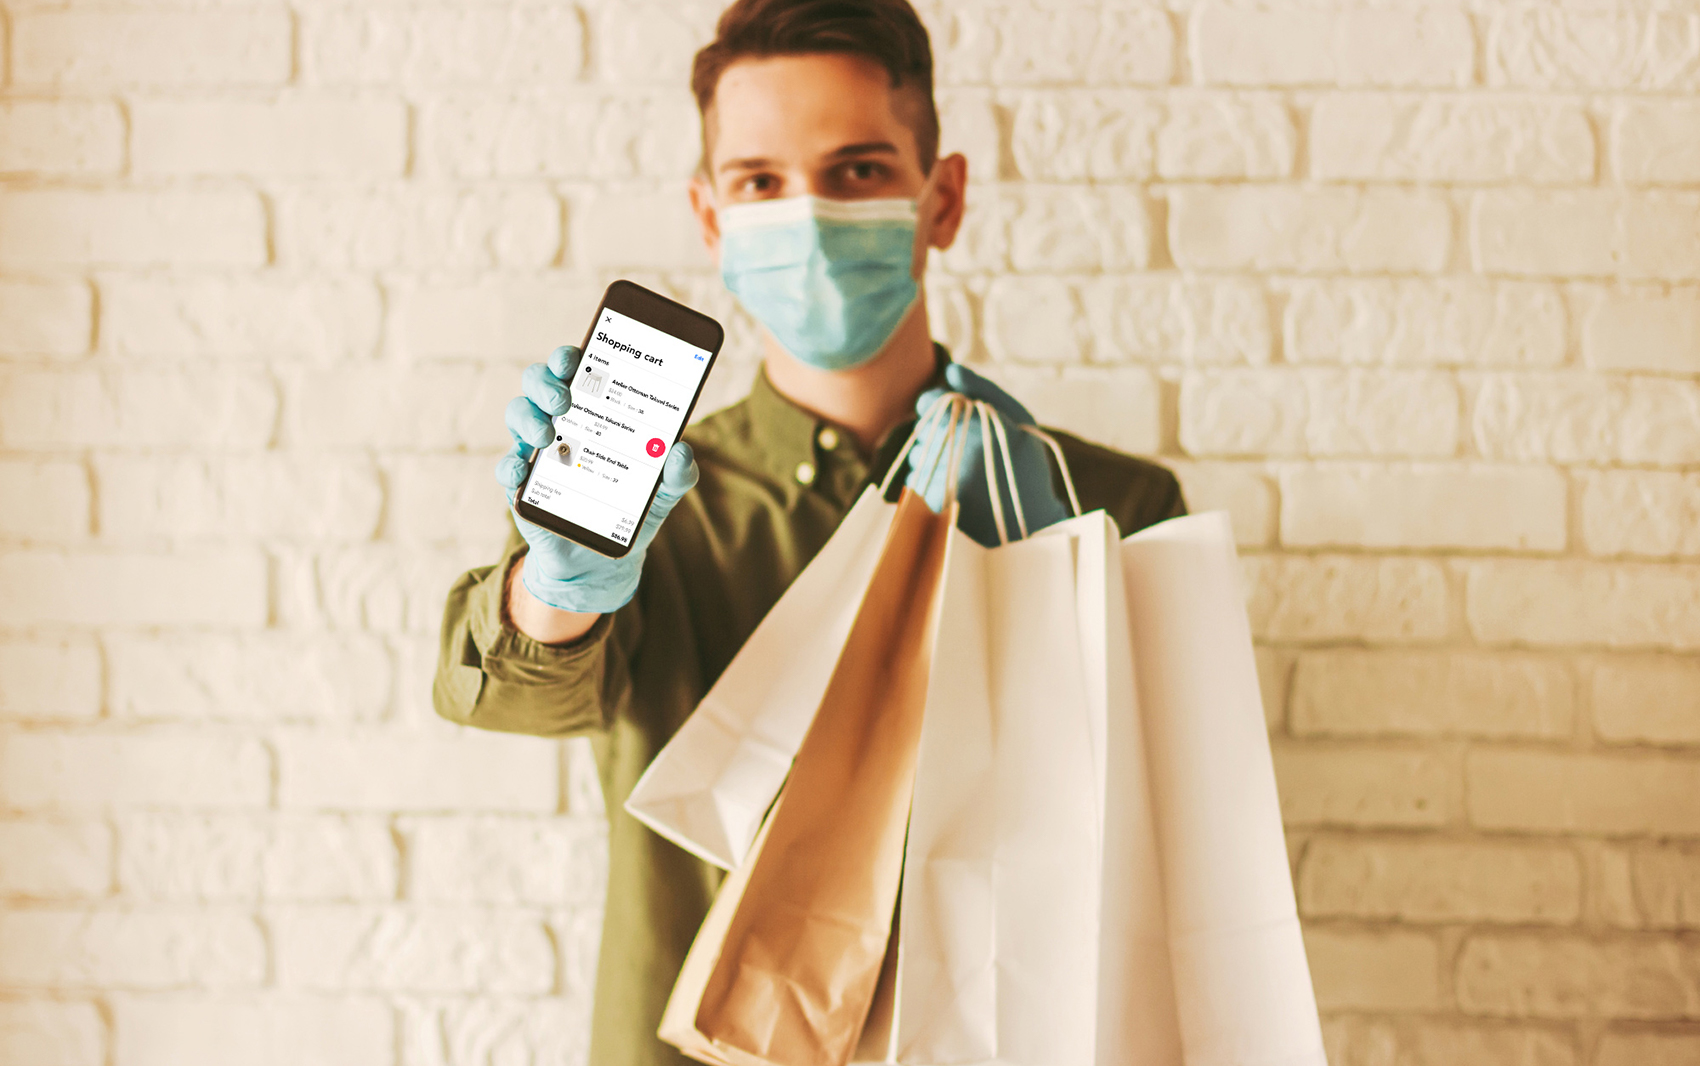 With the pandemic, shopping online has soared!